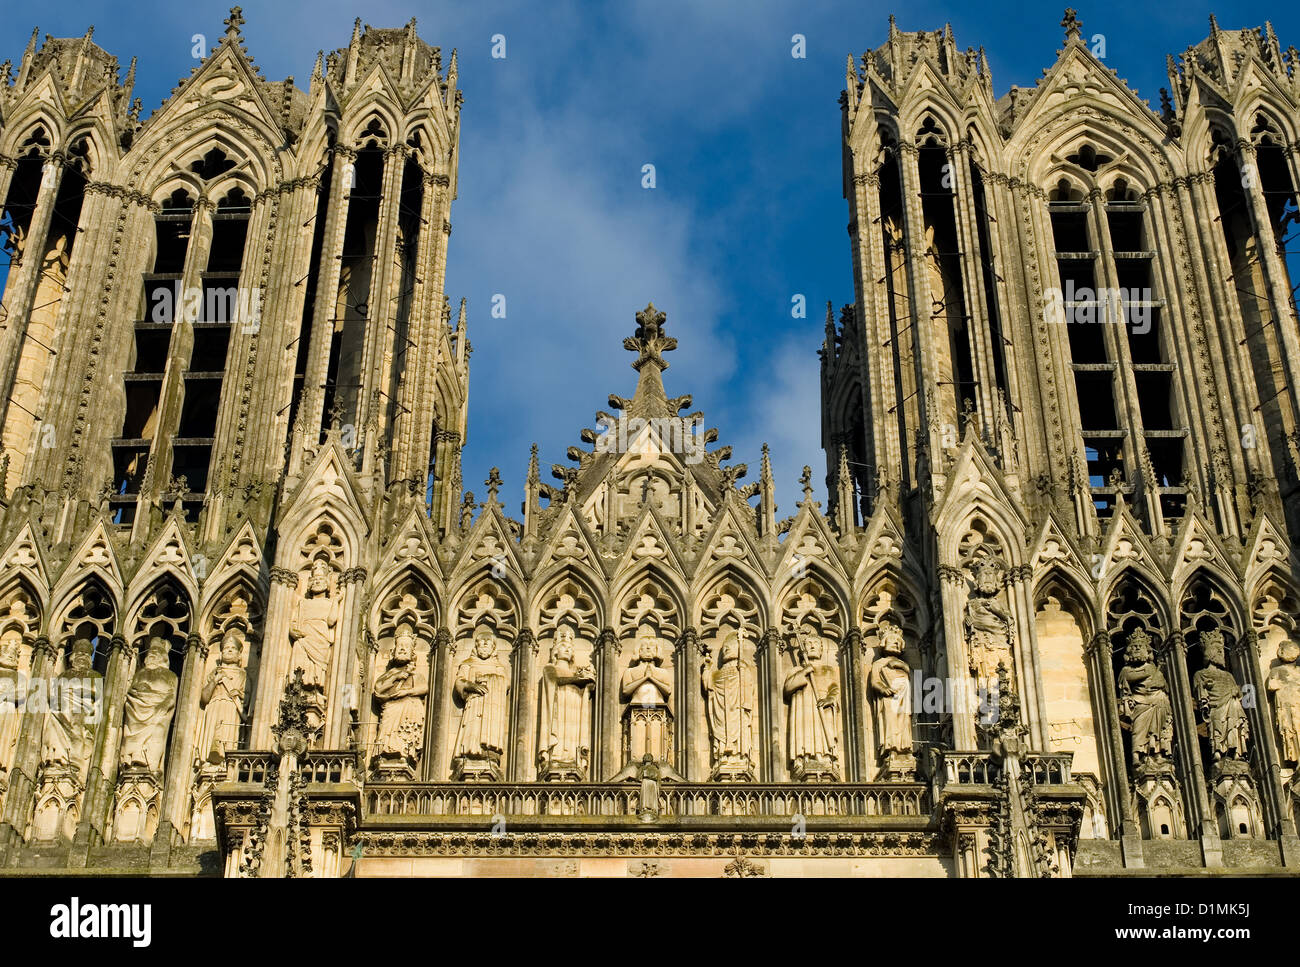 The imposing structure of Reims Cathedral, France Stock Photo